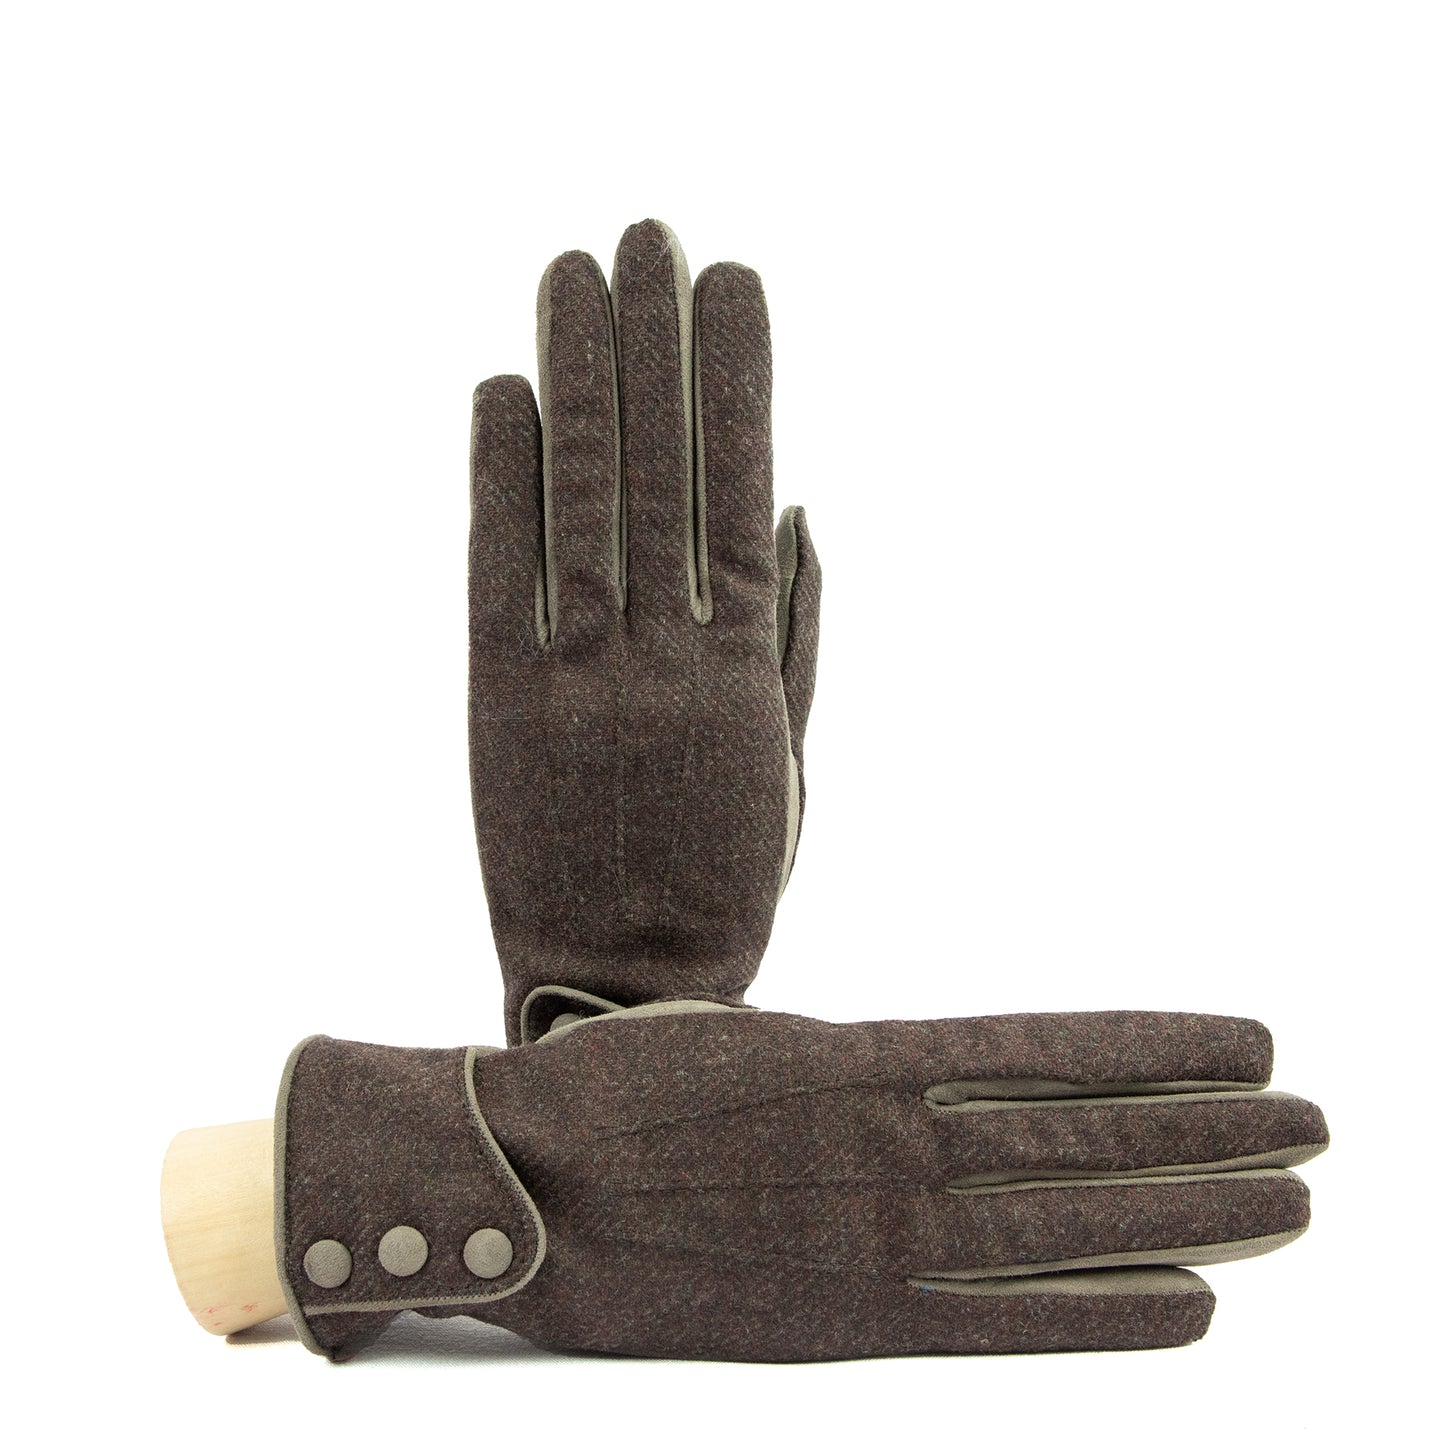 Women's brown suede leather gloves with Vitale Barberis Canonico wool top